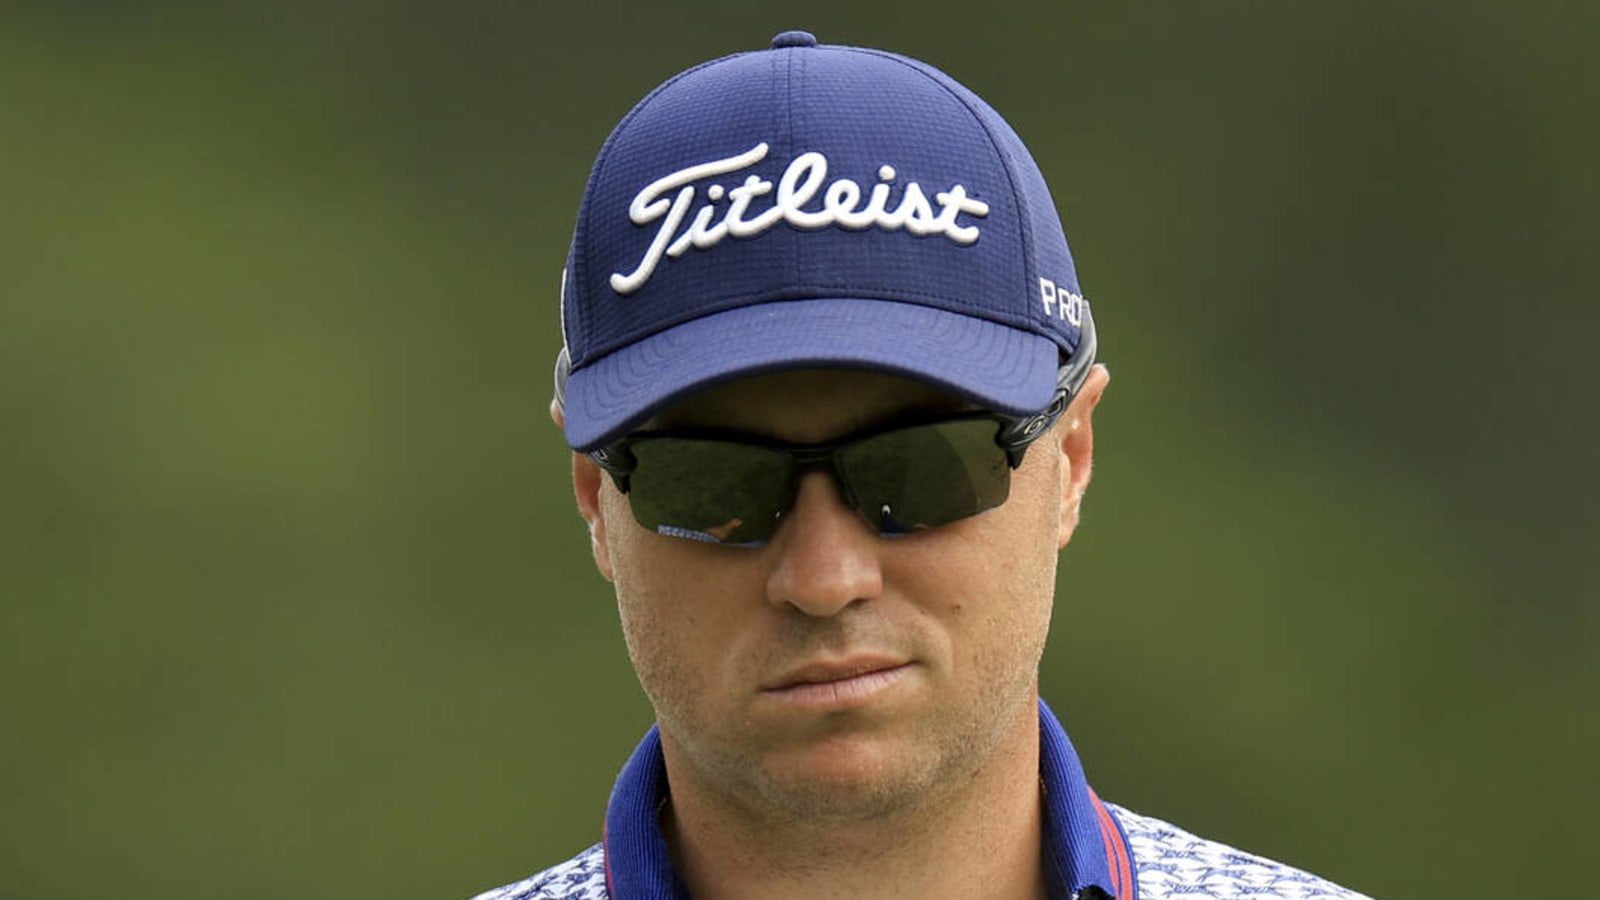 Watch: Justin Thomas is livid after poor shot at US Open